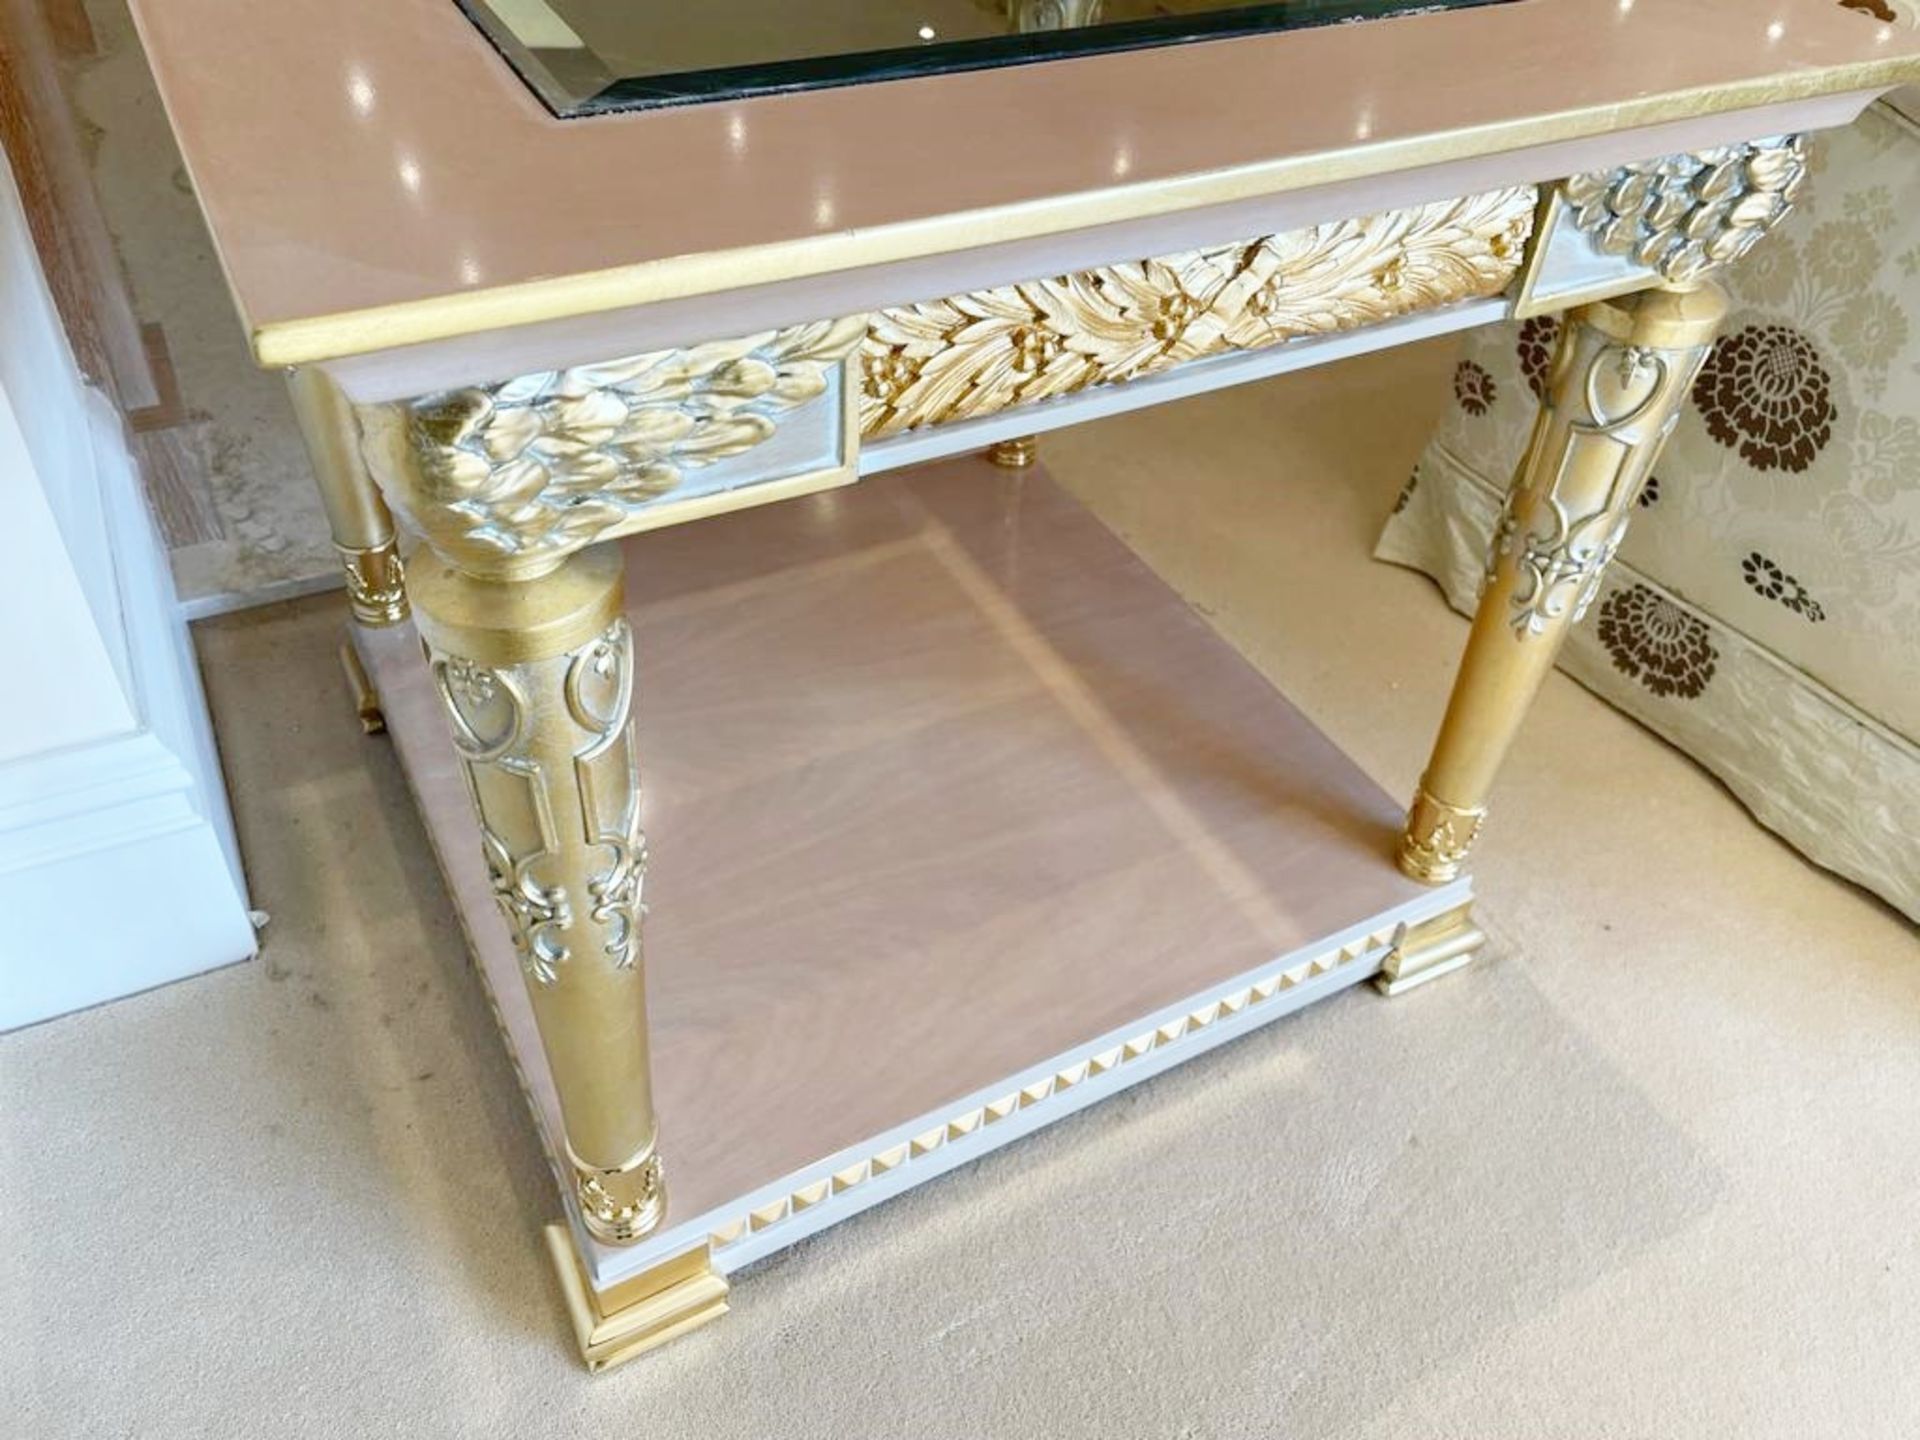 2 x Hand Carved Ornate Side Tables Complimented With Birchwood Veneer, Golden Pillar Legs, Carved - Image 10 of 13